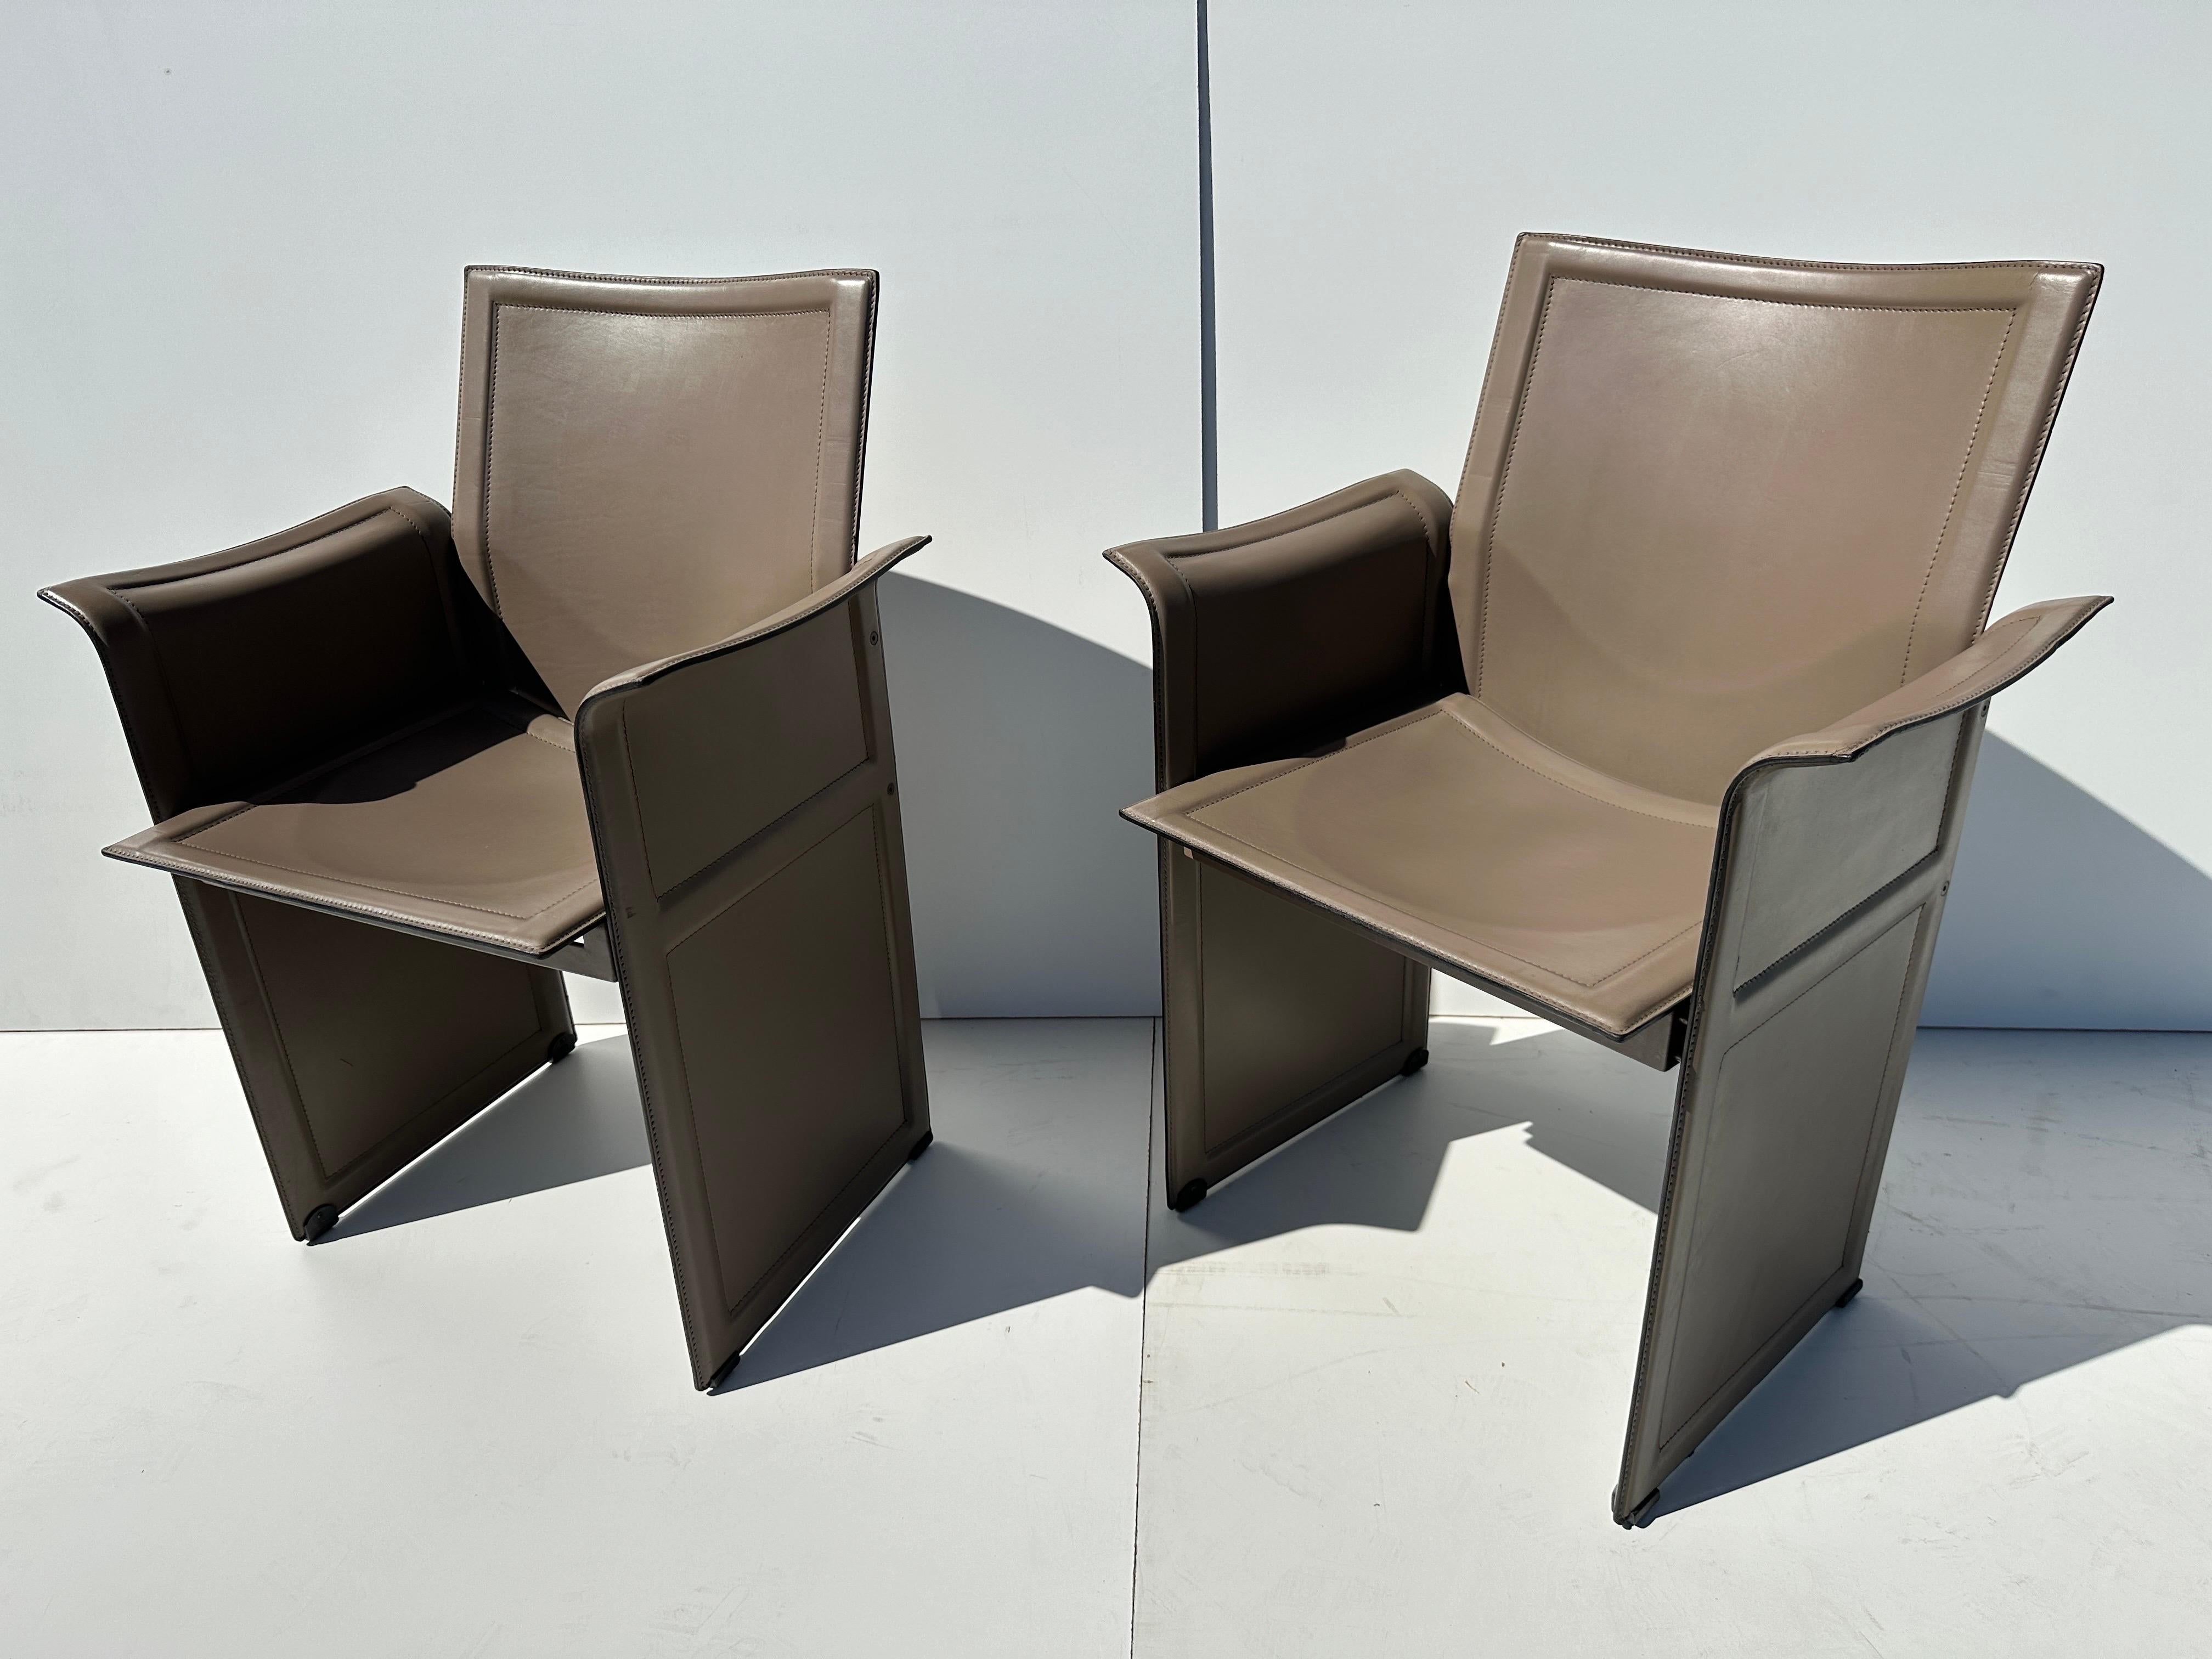 Set of four Tito Agnoli stitched leather  armchairs for Matteo Grassi .
Normal wear and patina. Arm is 25